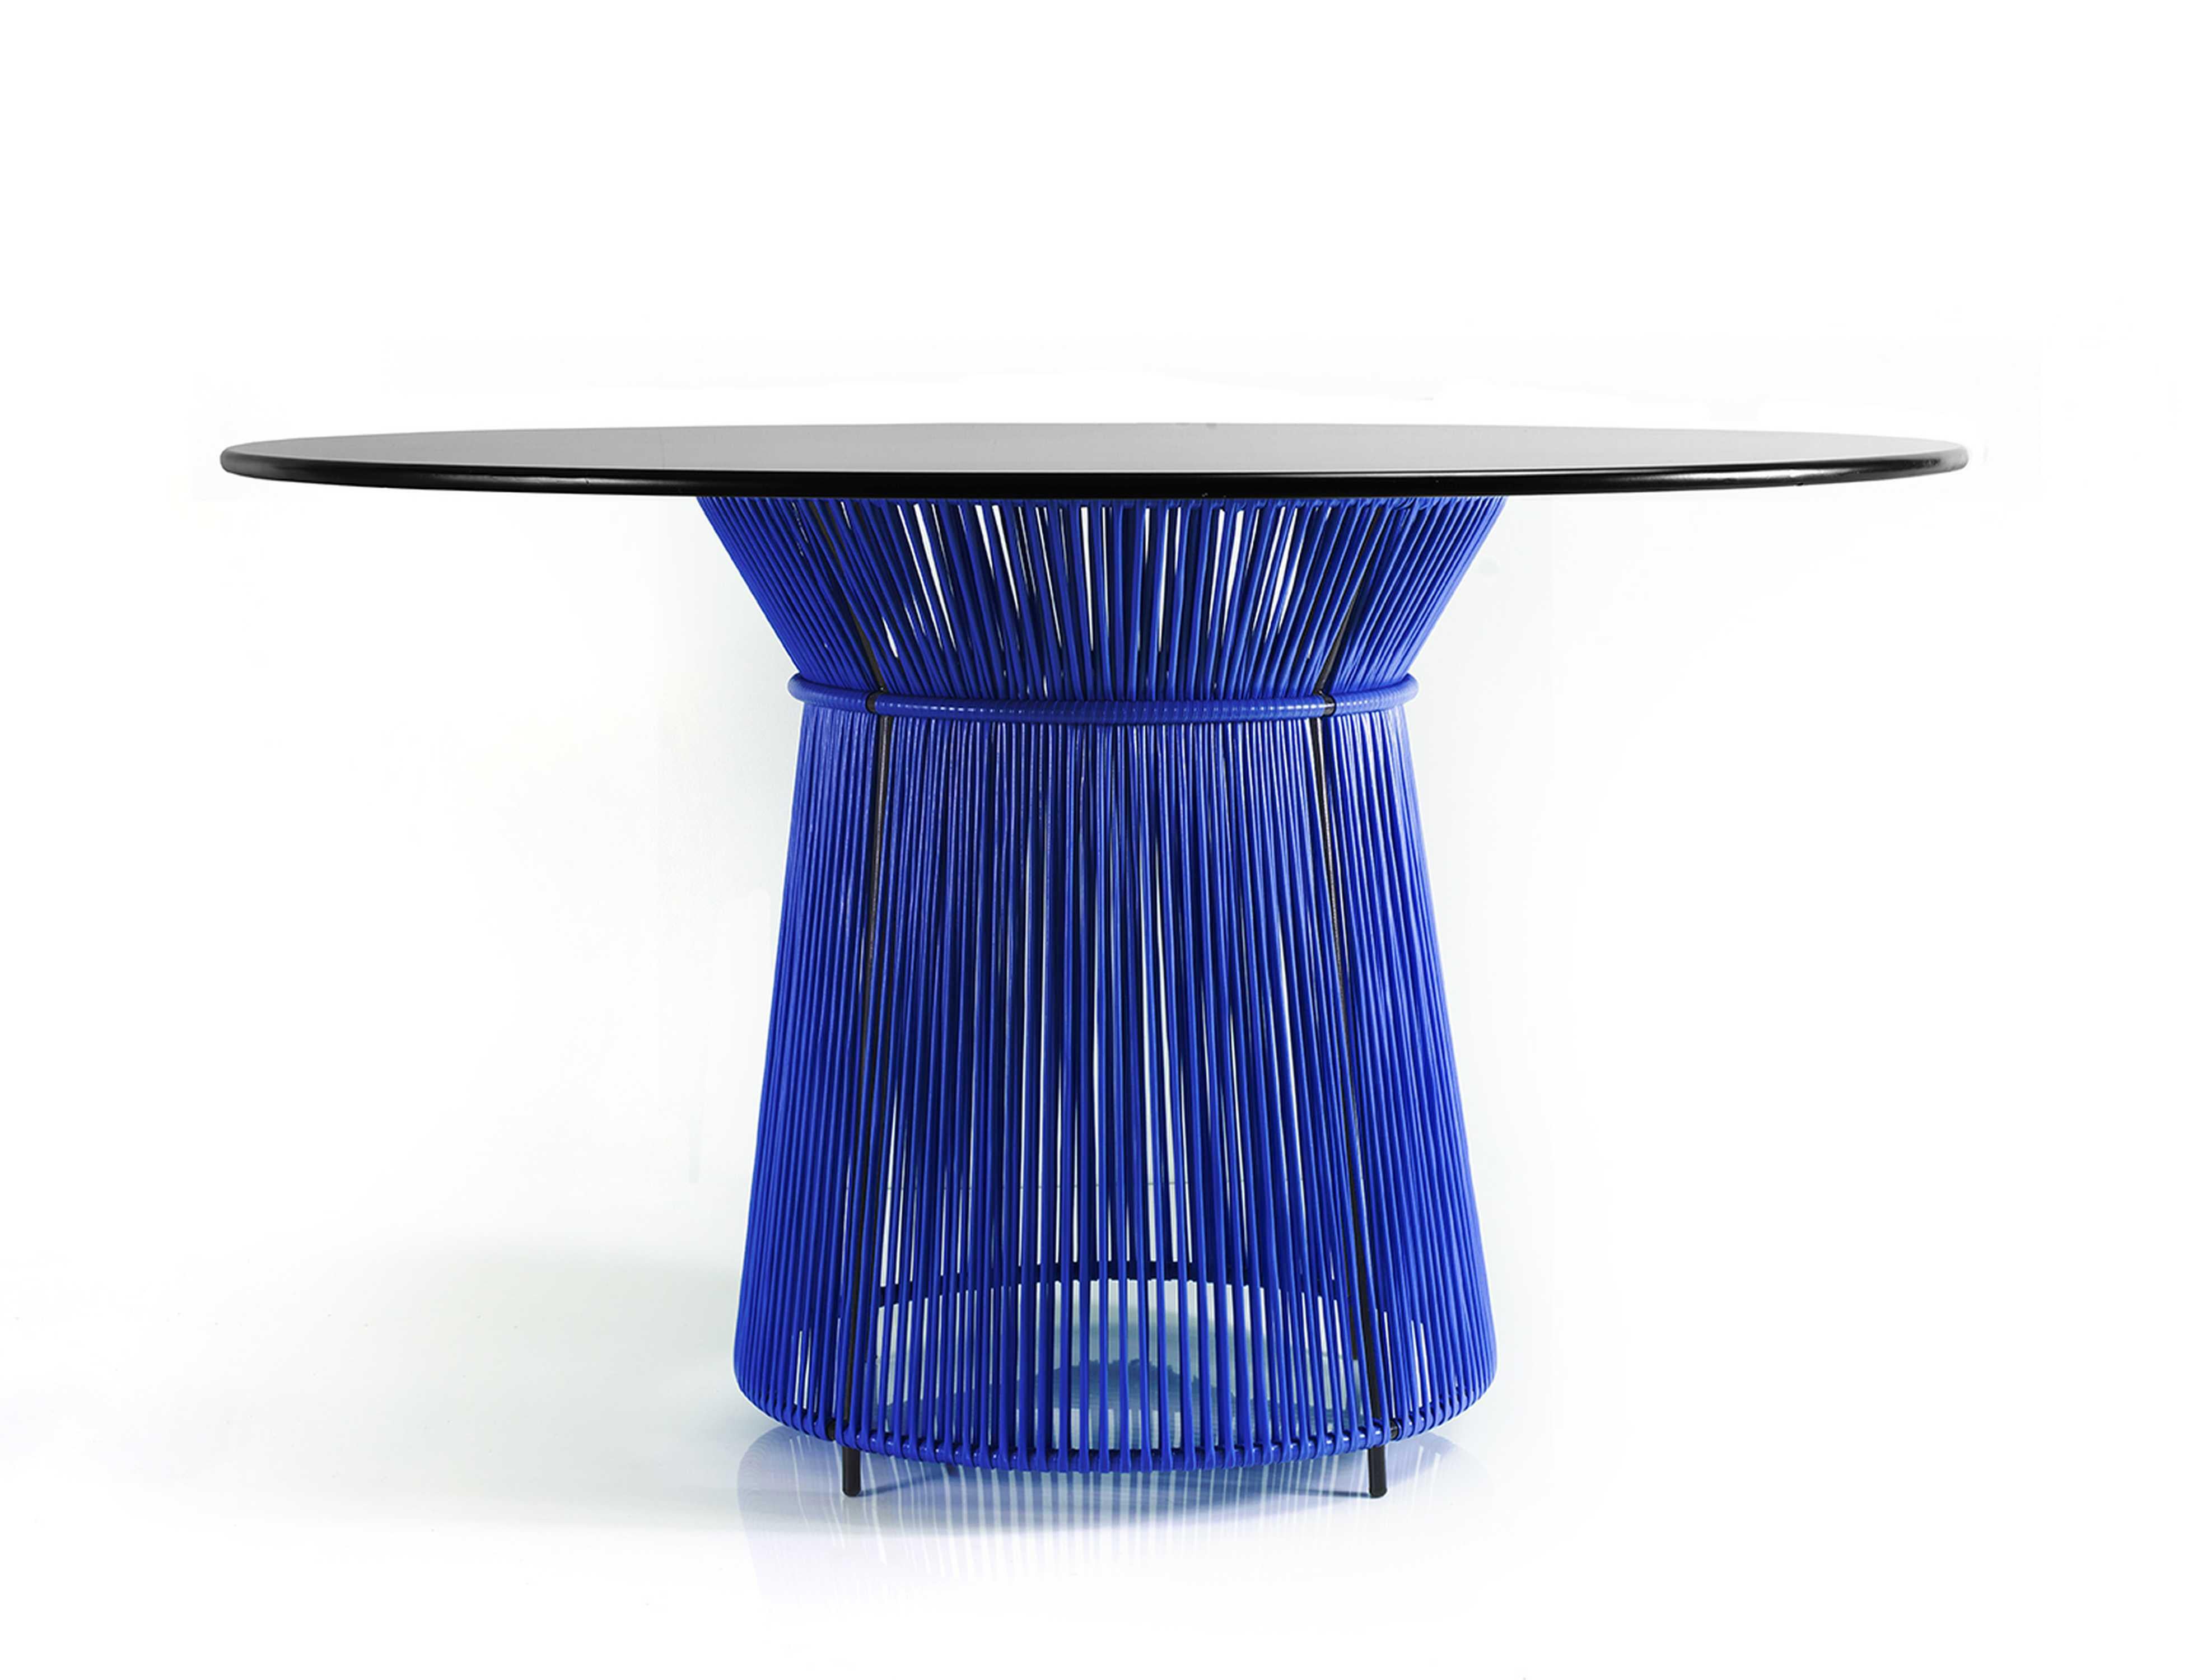 Blue Caribe dining table by Sebastian Herkner
Materials: Galvanized and powder-coated tubular steel. PVC strings are made from recycled plastic.
Technique: Made from recycled plastic and weaved by local craftspeople in Colombia. 
Dimensions: